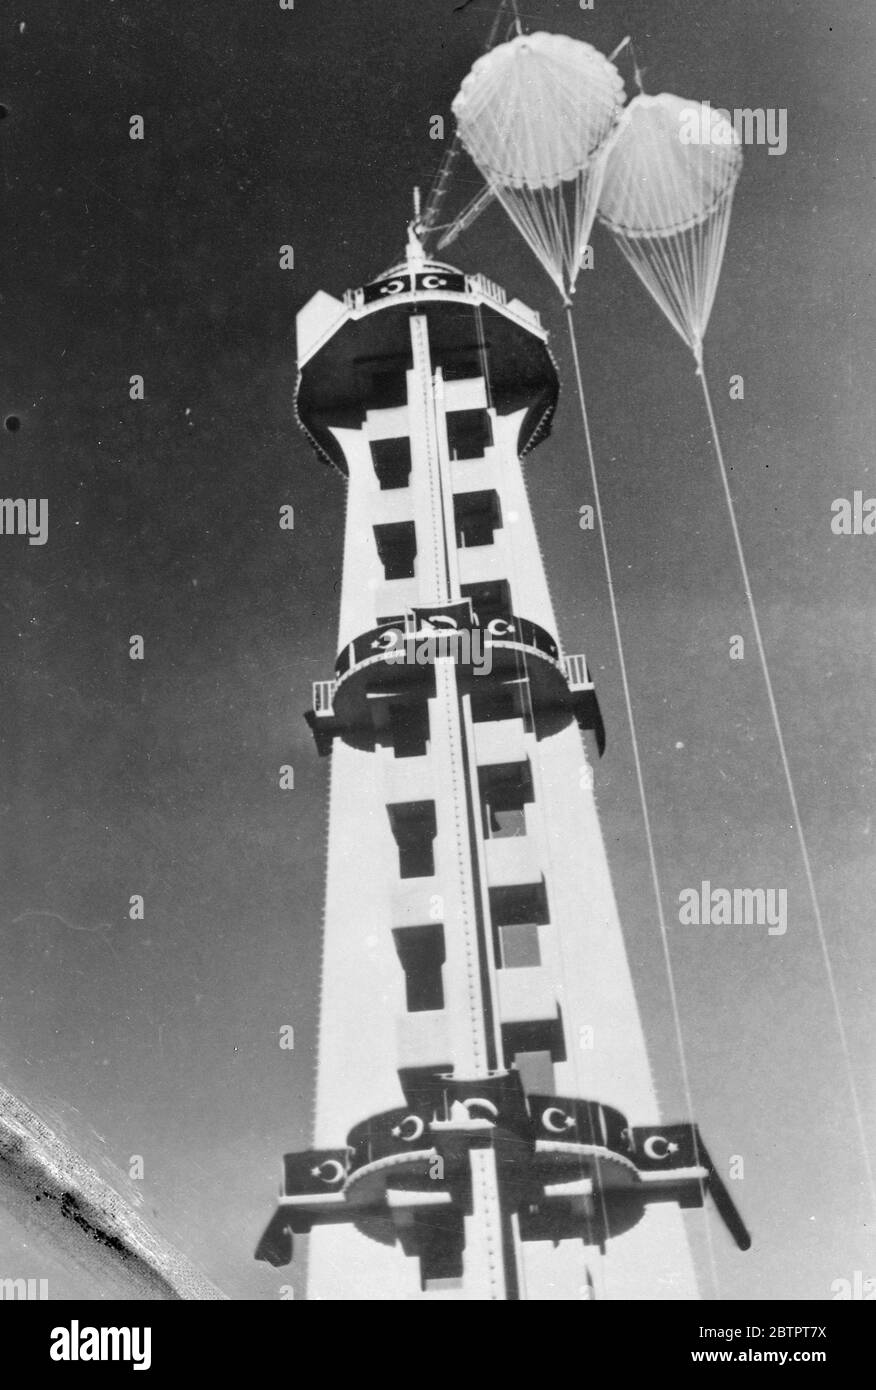 Parachute craze reaches Turkey. The modern craze of the captive parachute tower has spread from Russia and France to Turkey. In Ankara, the capital, young Turkey can now get a thrill and valuable instruction by a leap from the tall white tower, which has been erected in the city. The tower as to parachutes, which are controlled by machinery. 5 December 1937 Stock Photo